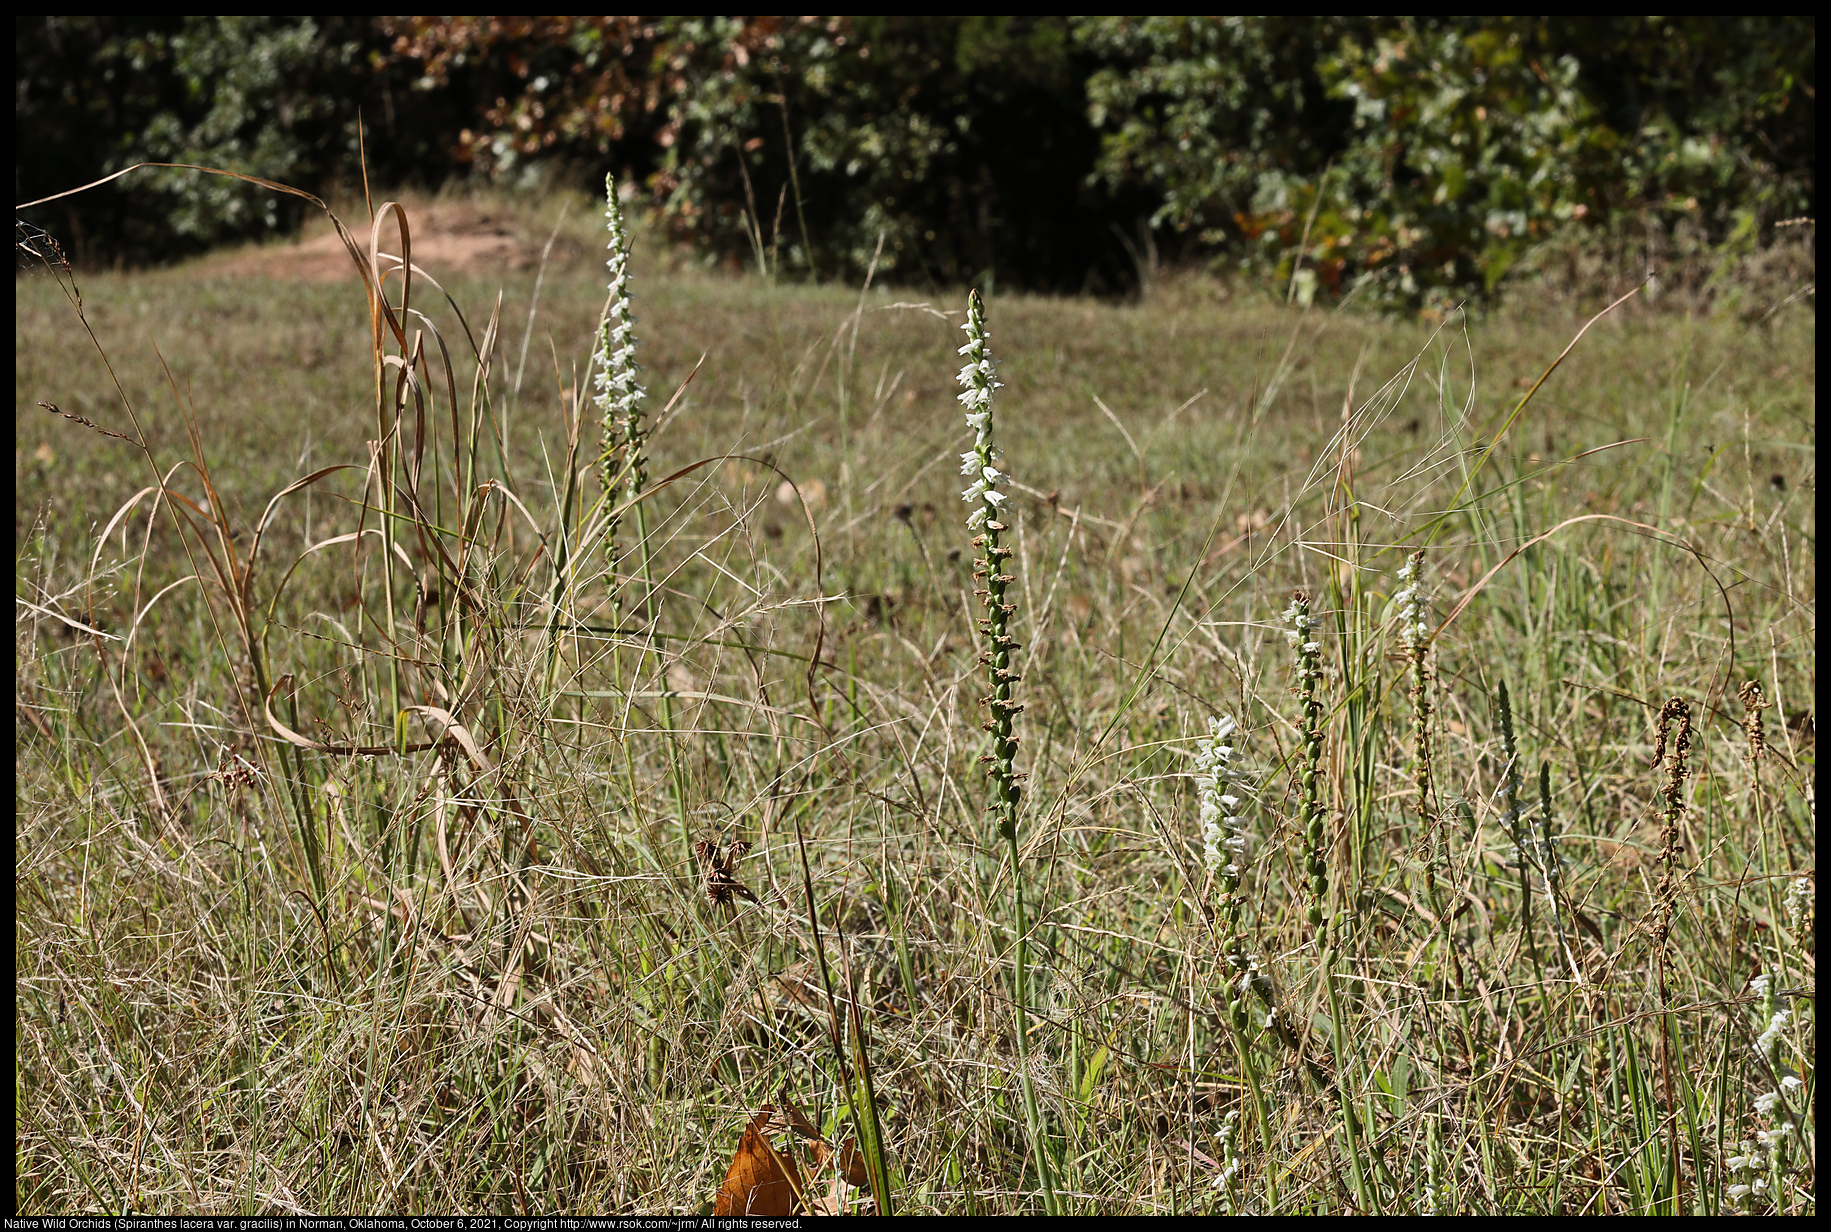 Native Wild Orchids (Spiranthes lacera var. gracilis) in Norman, Oklahoma, October 6, 2021